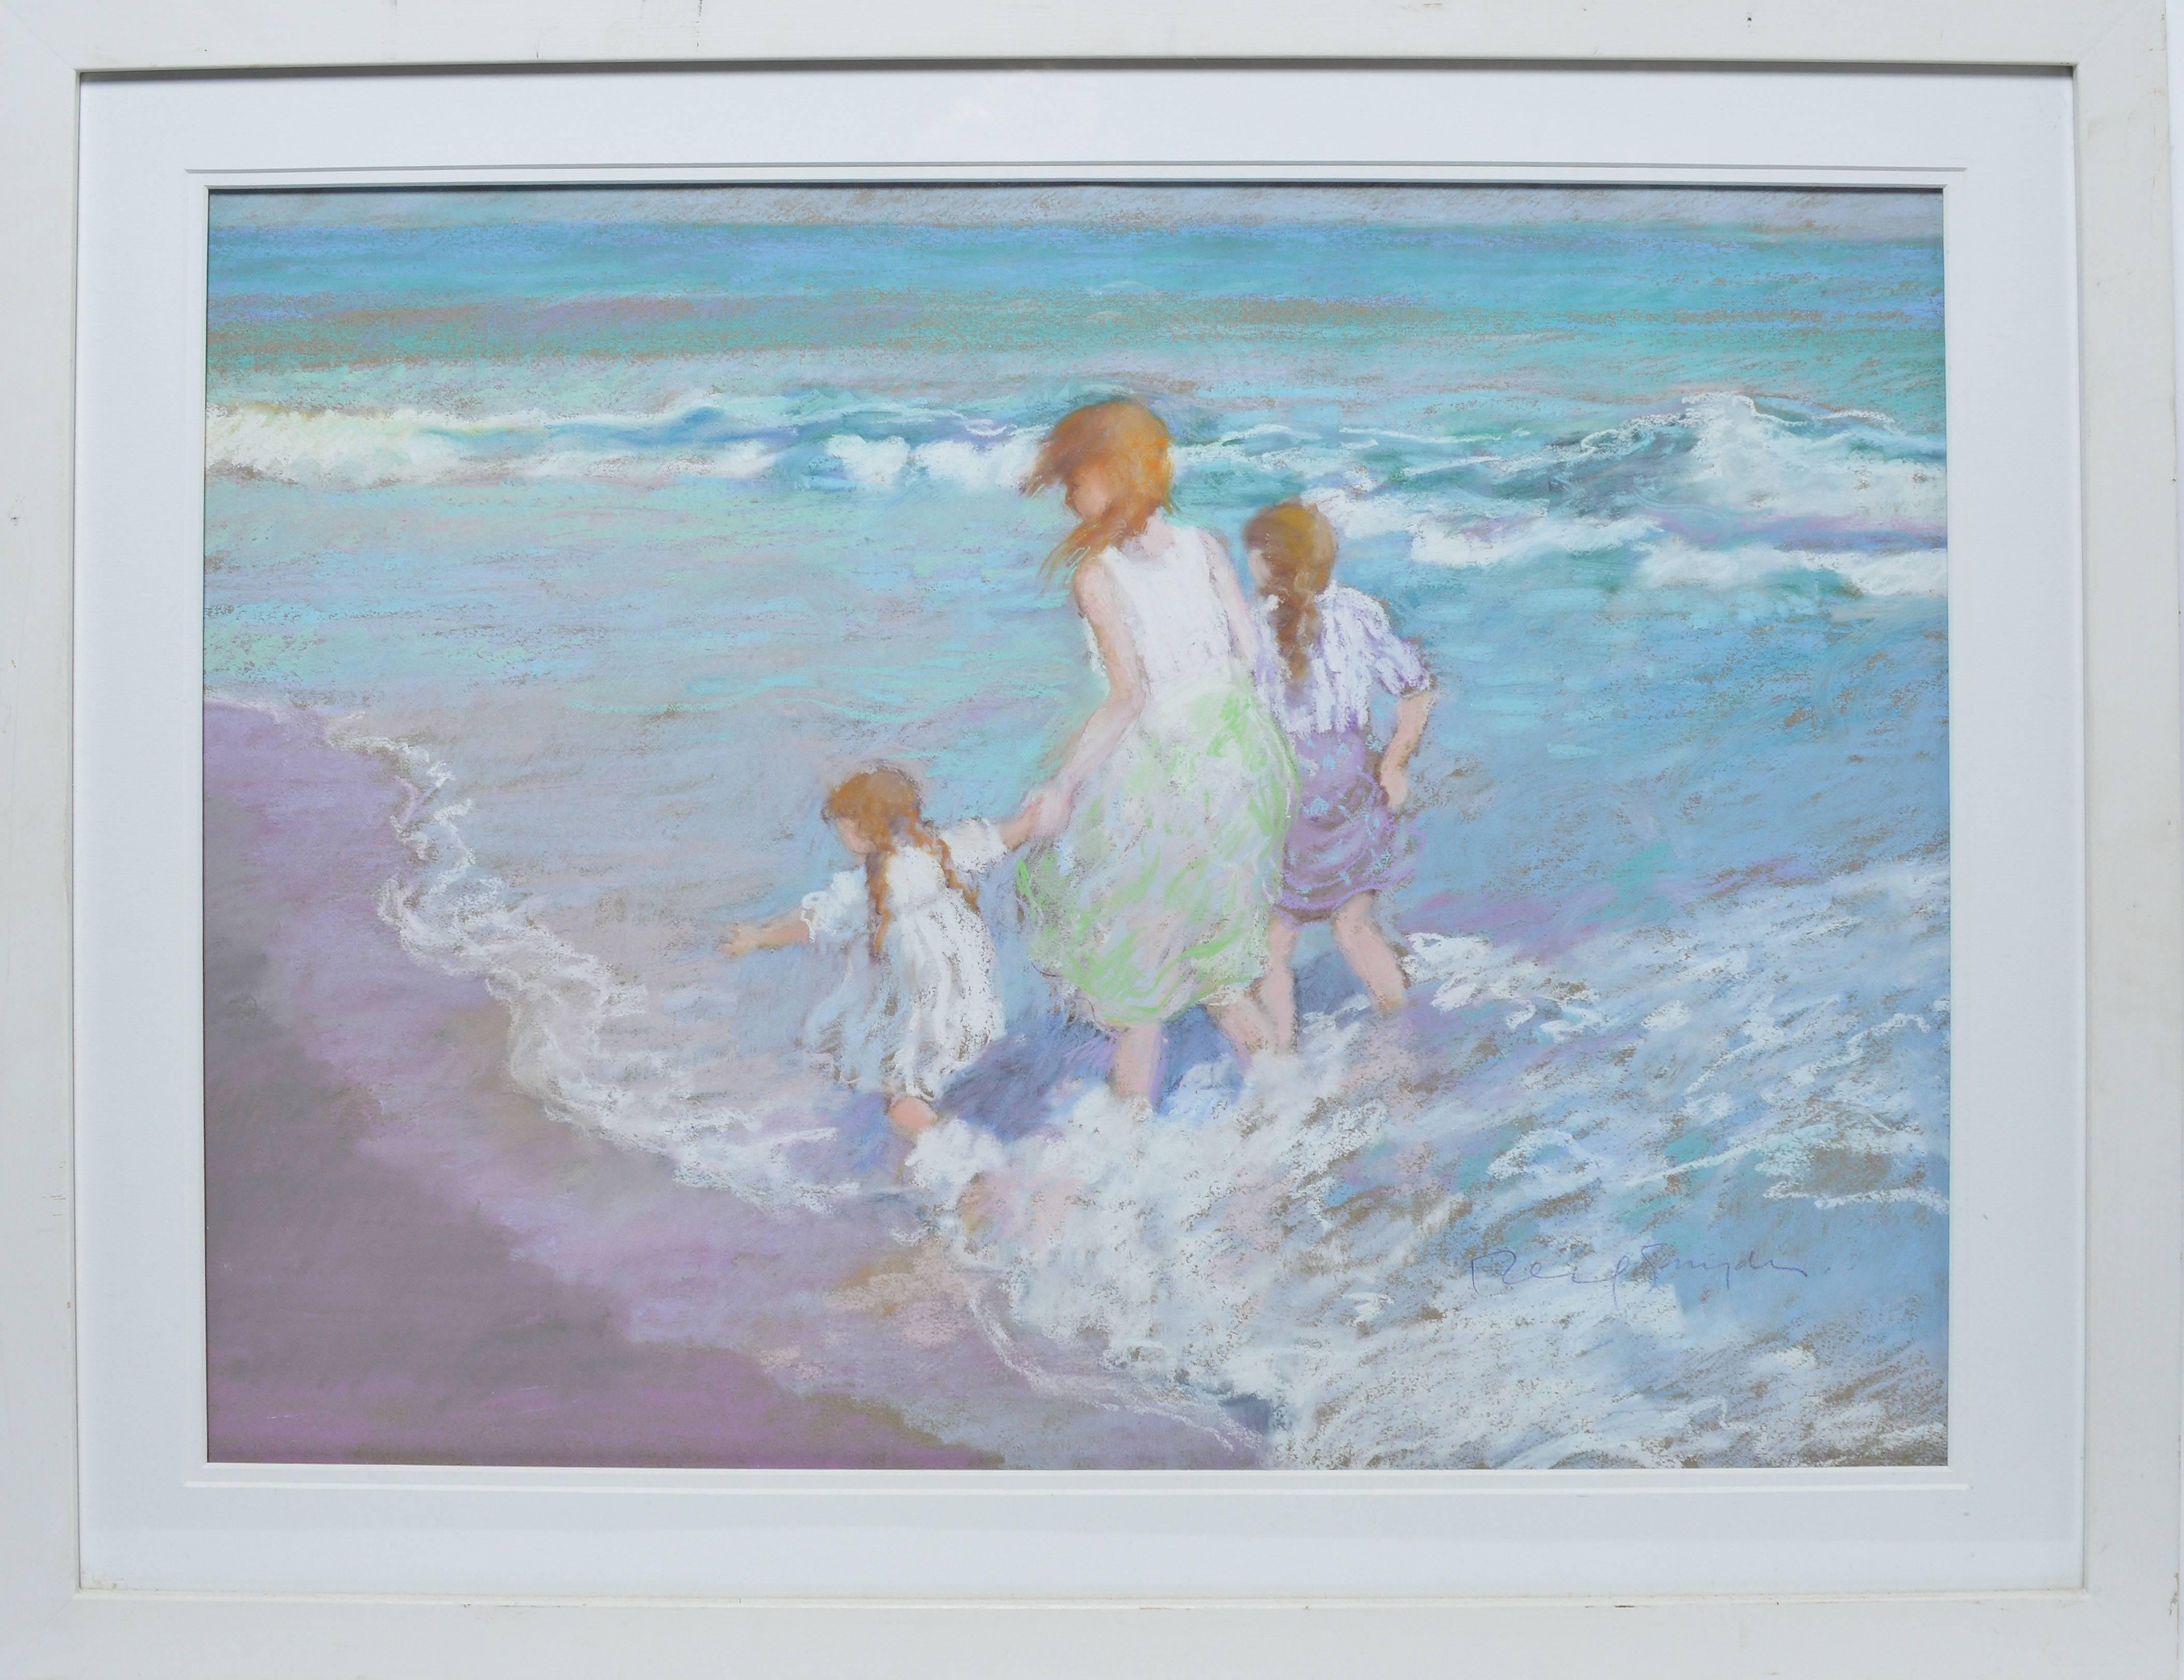 Impressionist beach view with three girls walking by Judith Reifsnyder.  Pastel on board, circa 1990.  Signed lower right, "Reifsnyder".  Displayed in a white wood frame behind glass.  Image size, 24"L x 18"H, overall 30"L x 24"H.